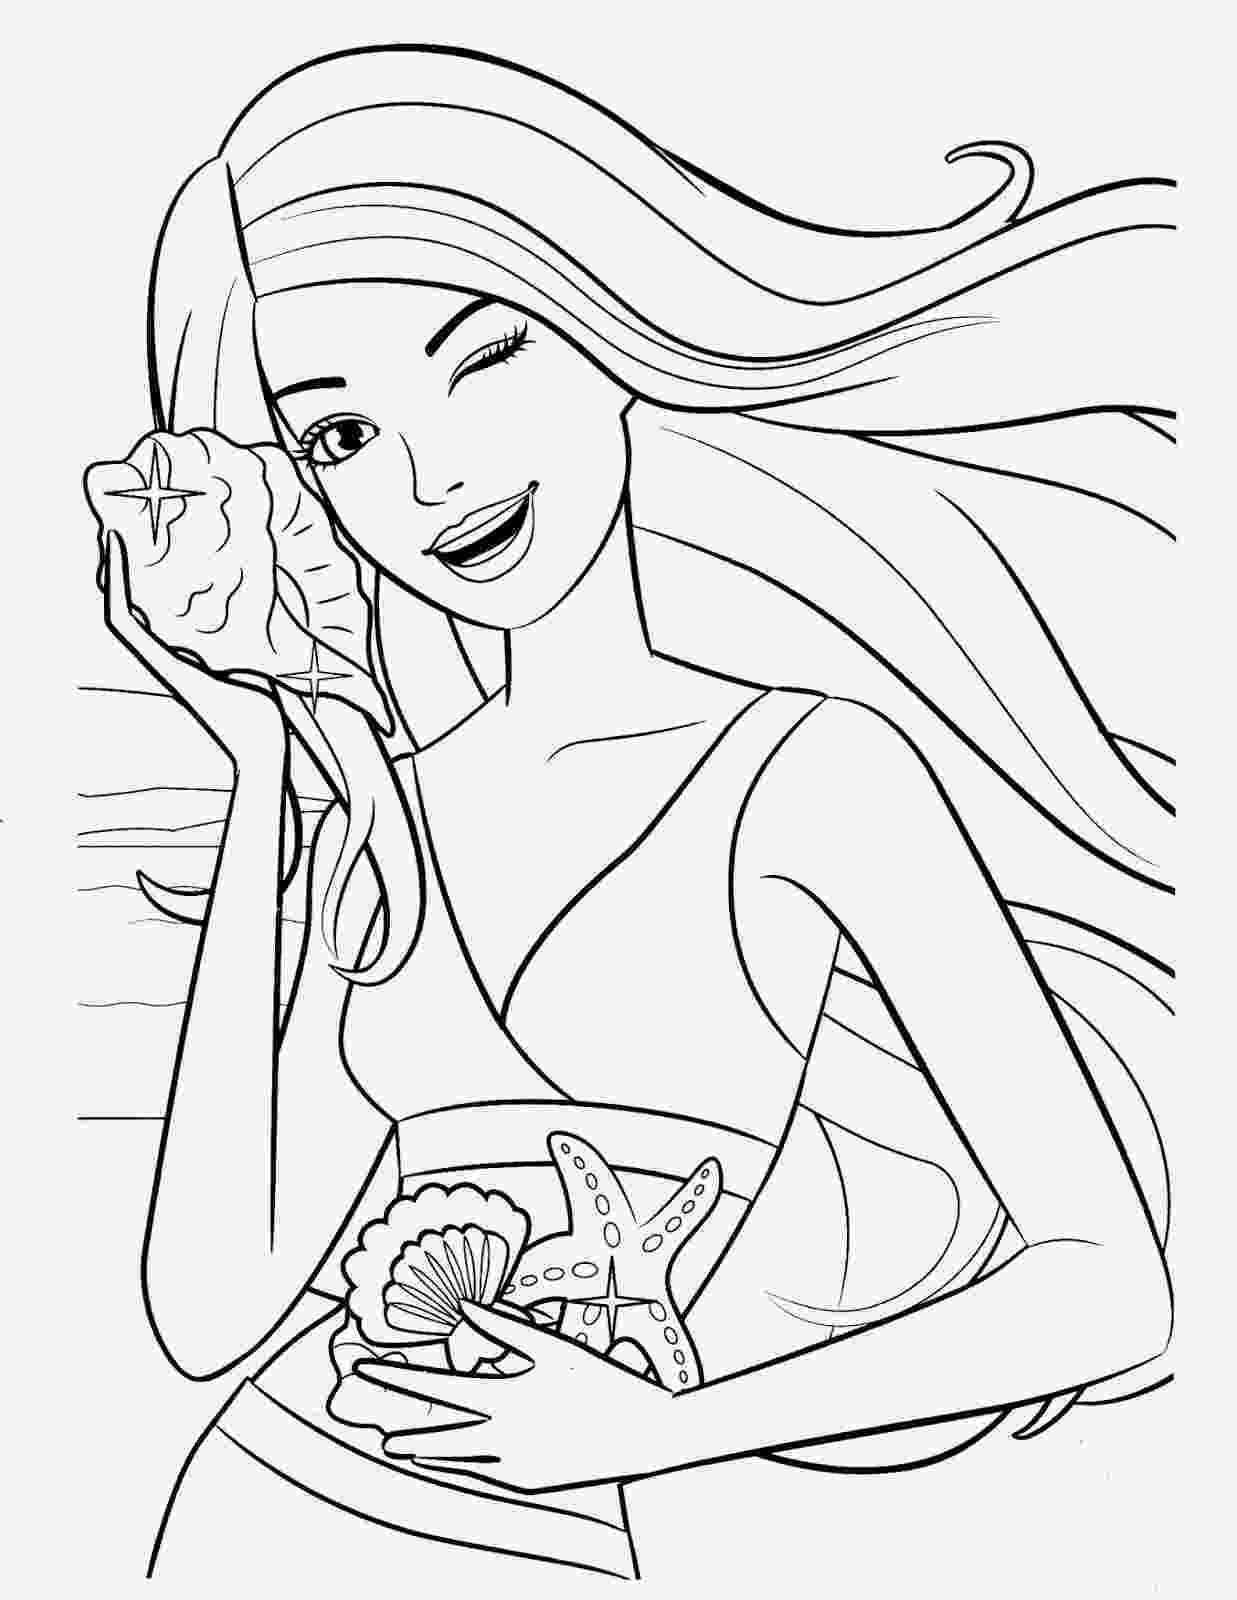 barbie color pages to print barbie coloring pages color pages barbie to print 